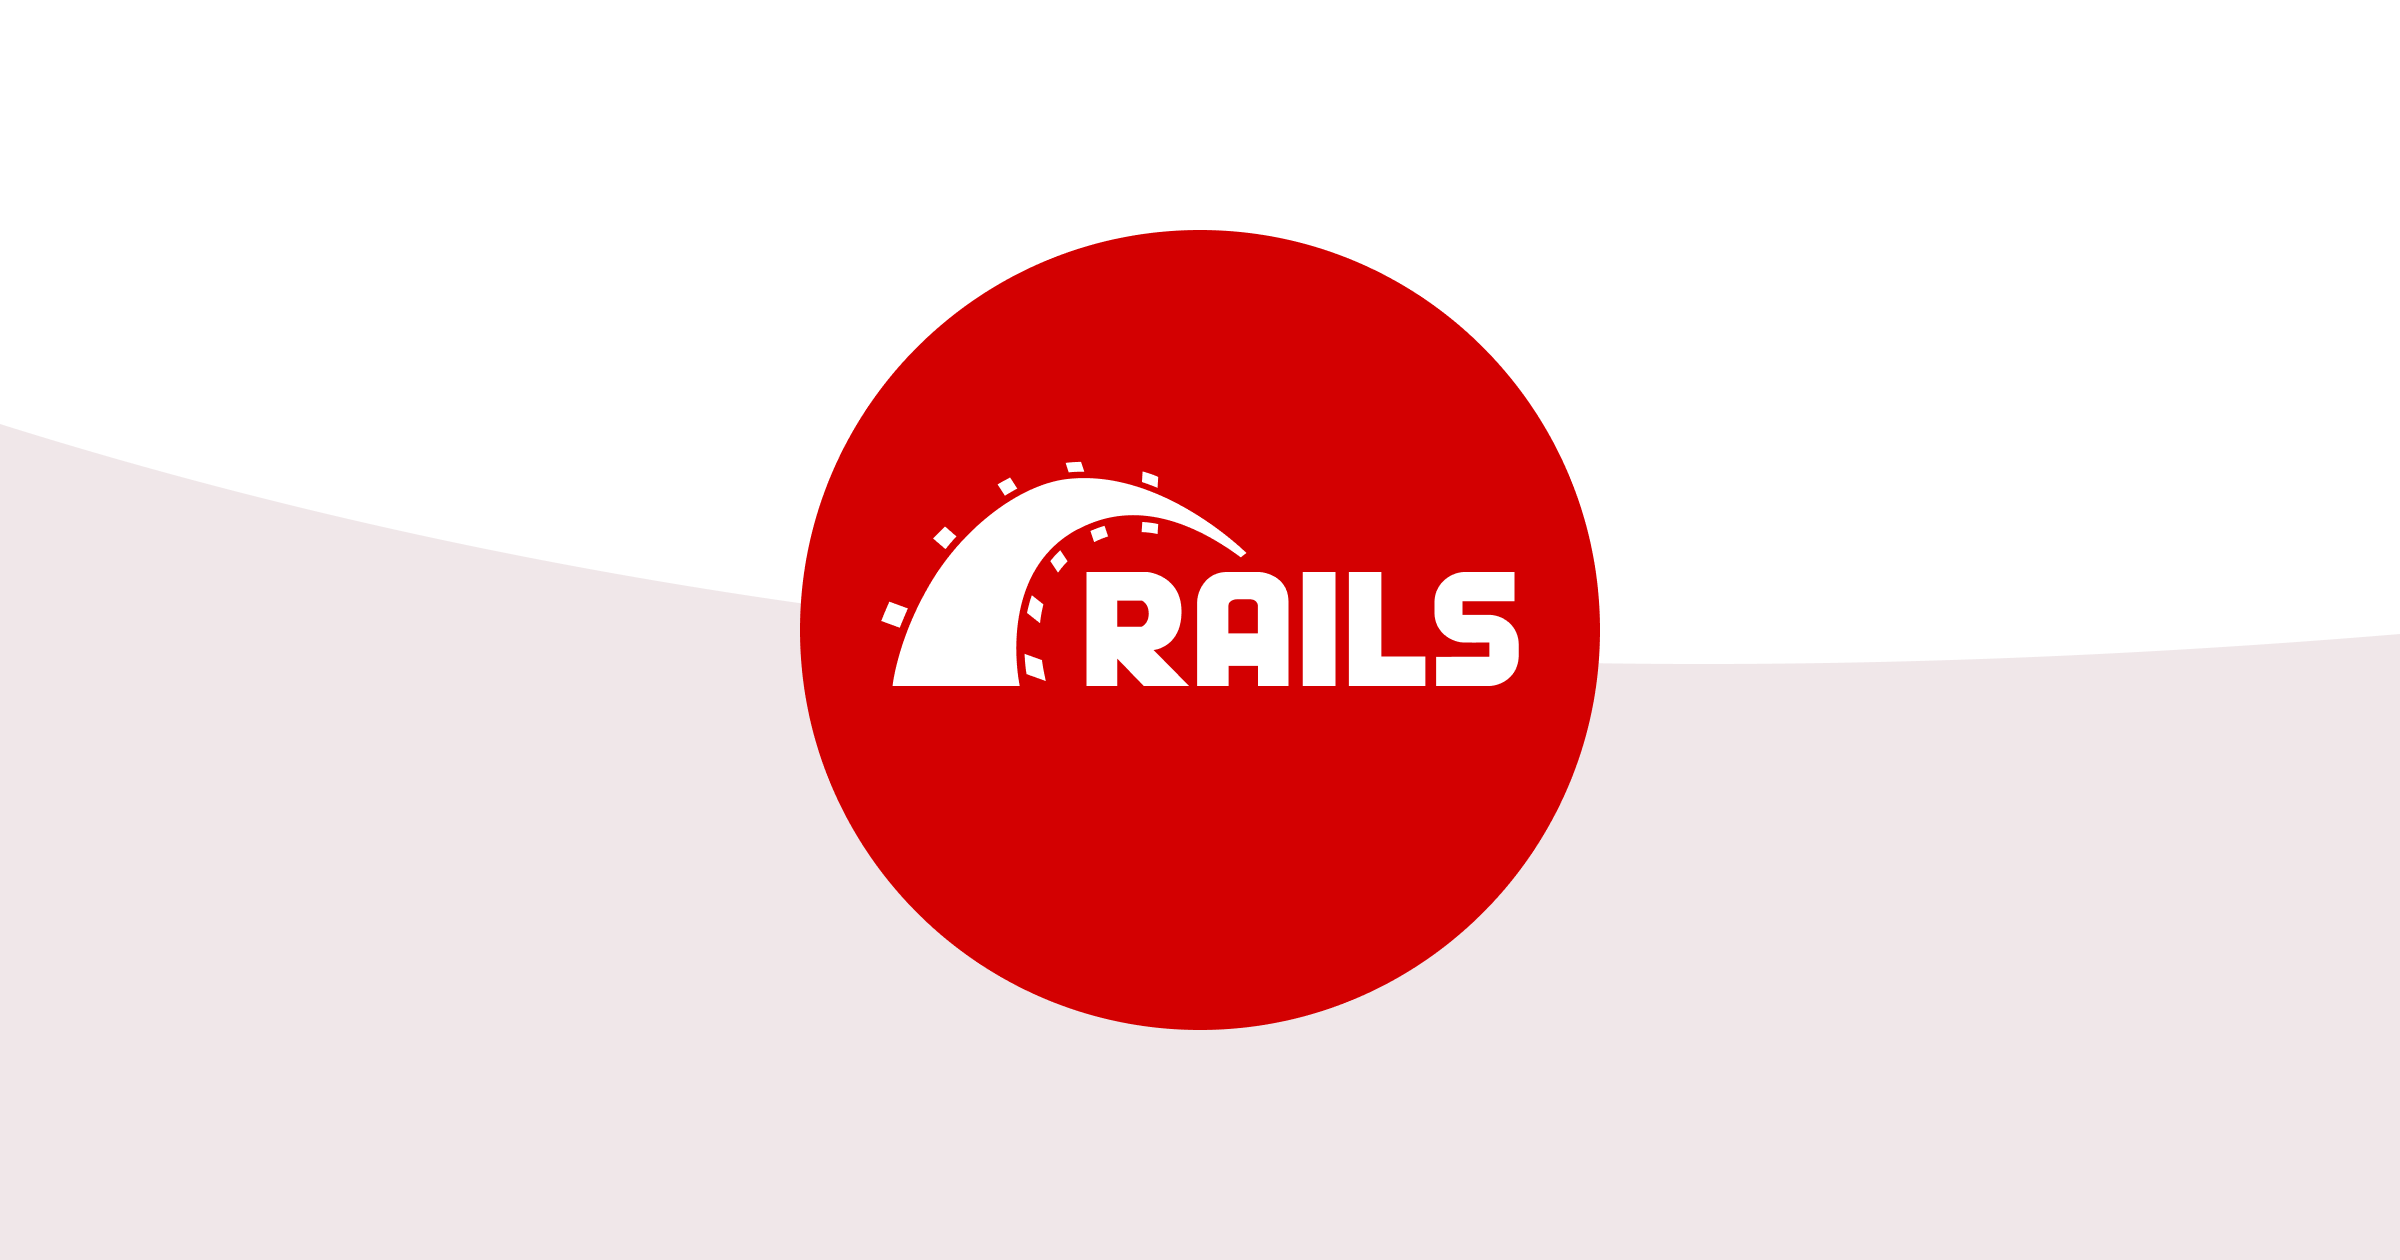 Ruby on Bed Rails– Bed rails 7.0.4.3 and also 6.1.7.3 have actually been launched!